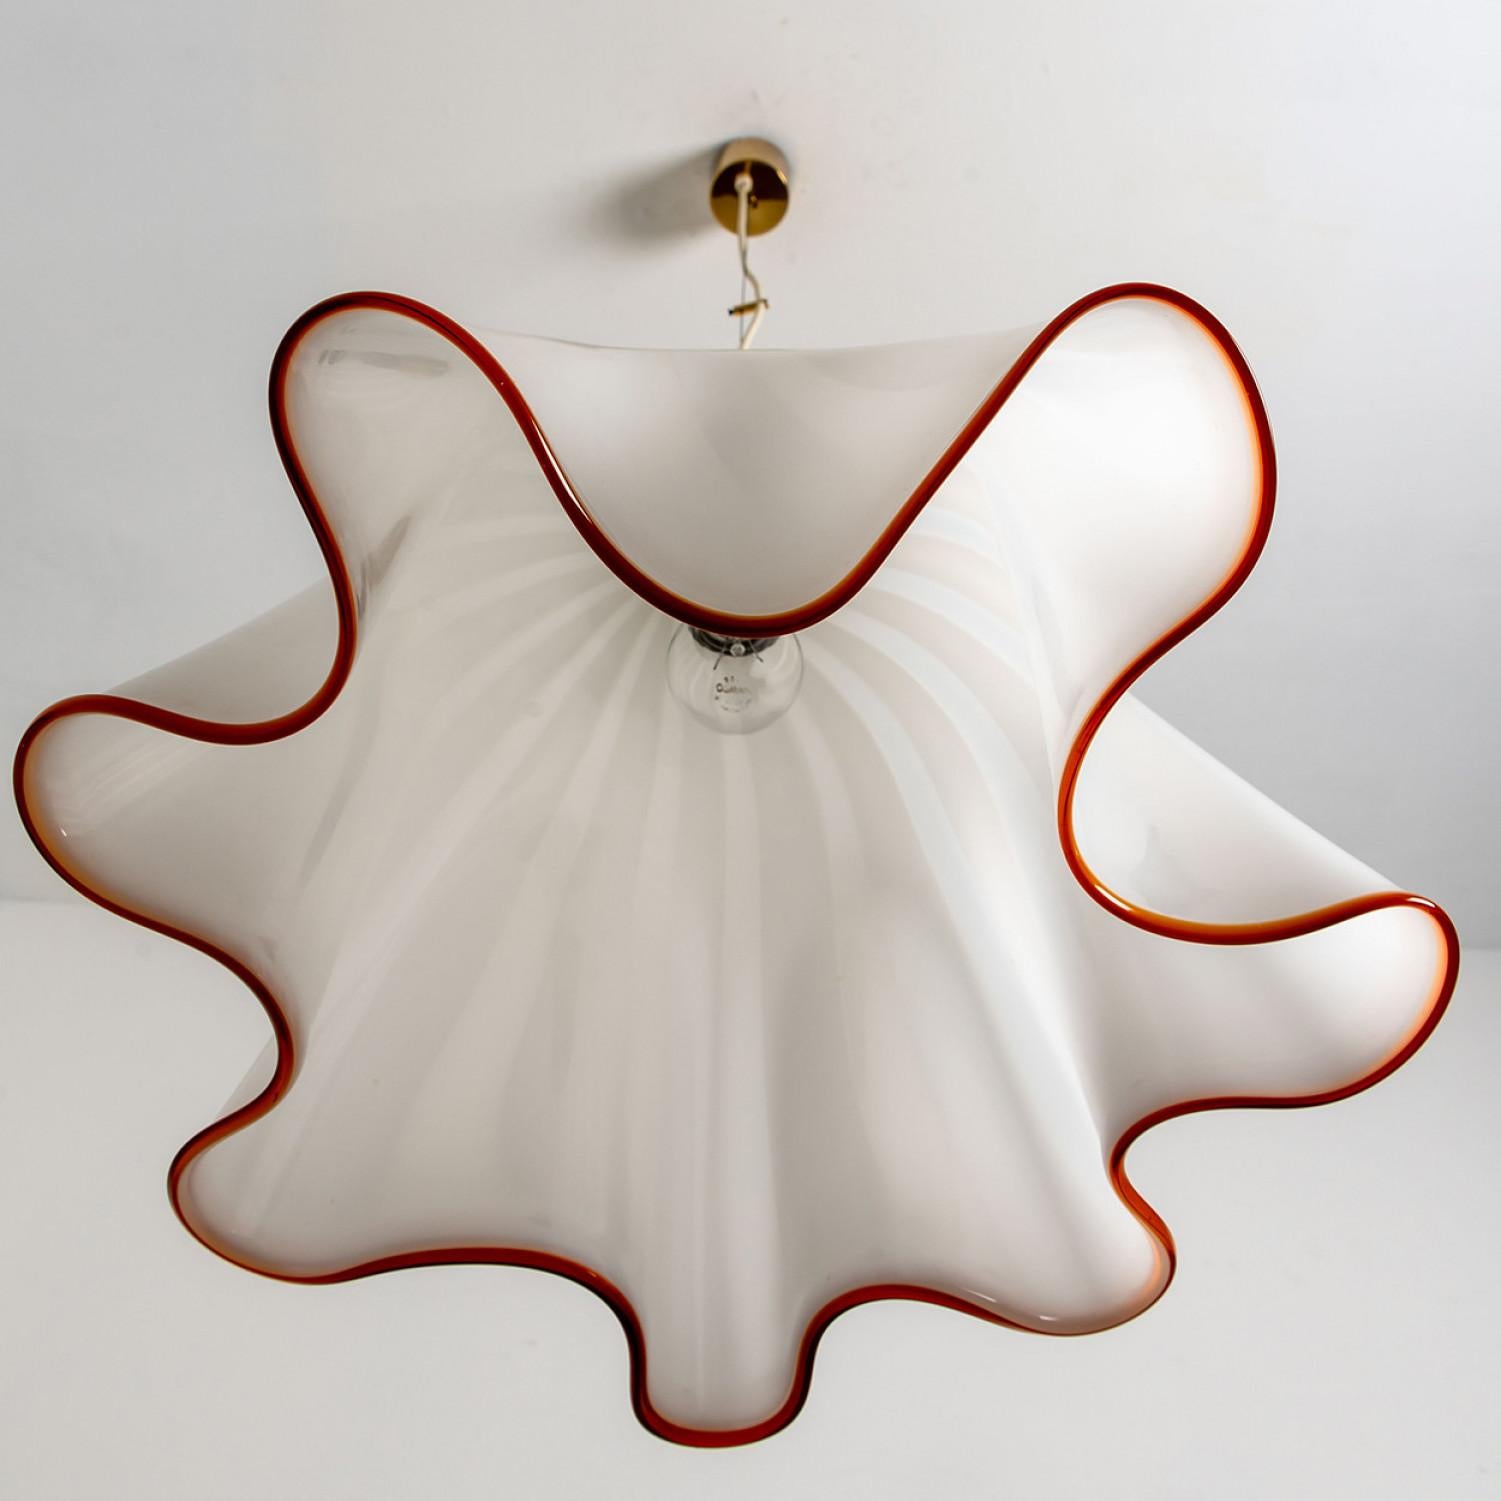 Other 1 of the 2 Large Murano Glass Fazzoletto Pendant Light by J.T. Kalmar, 1960s For Sale